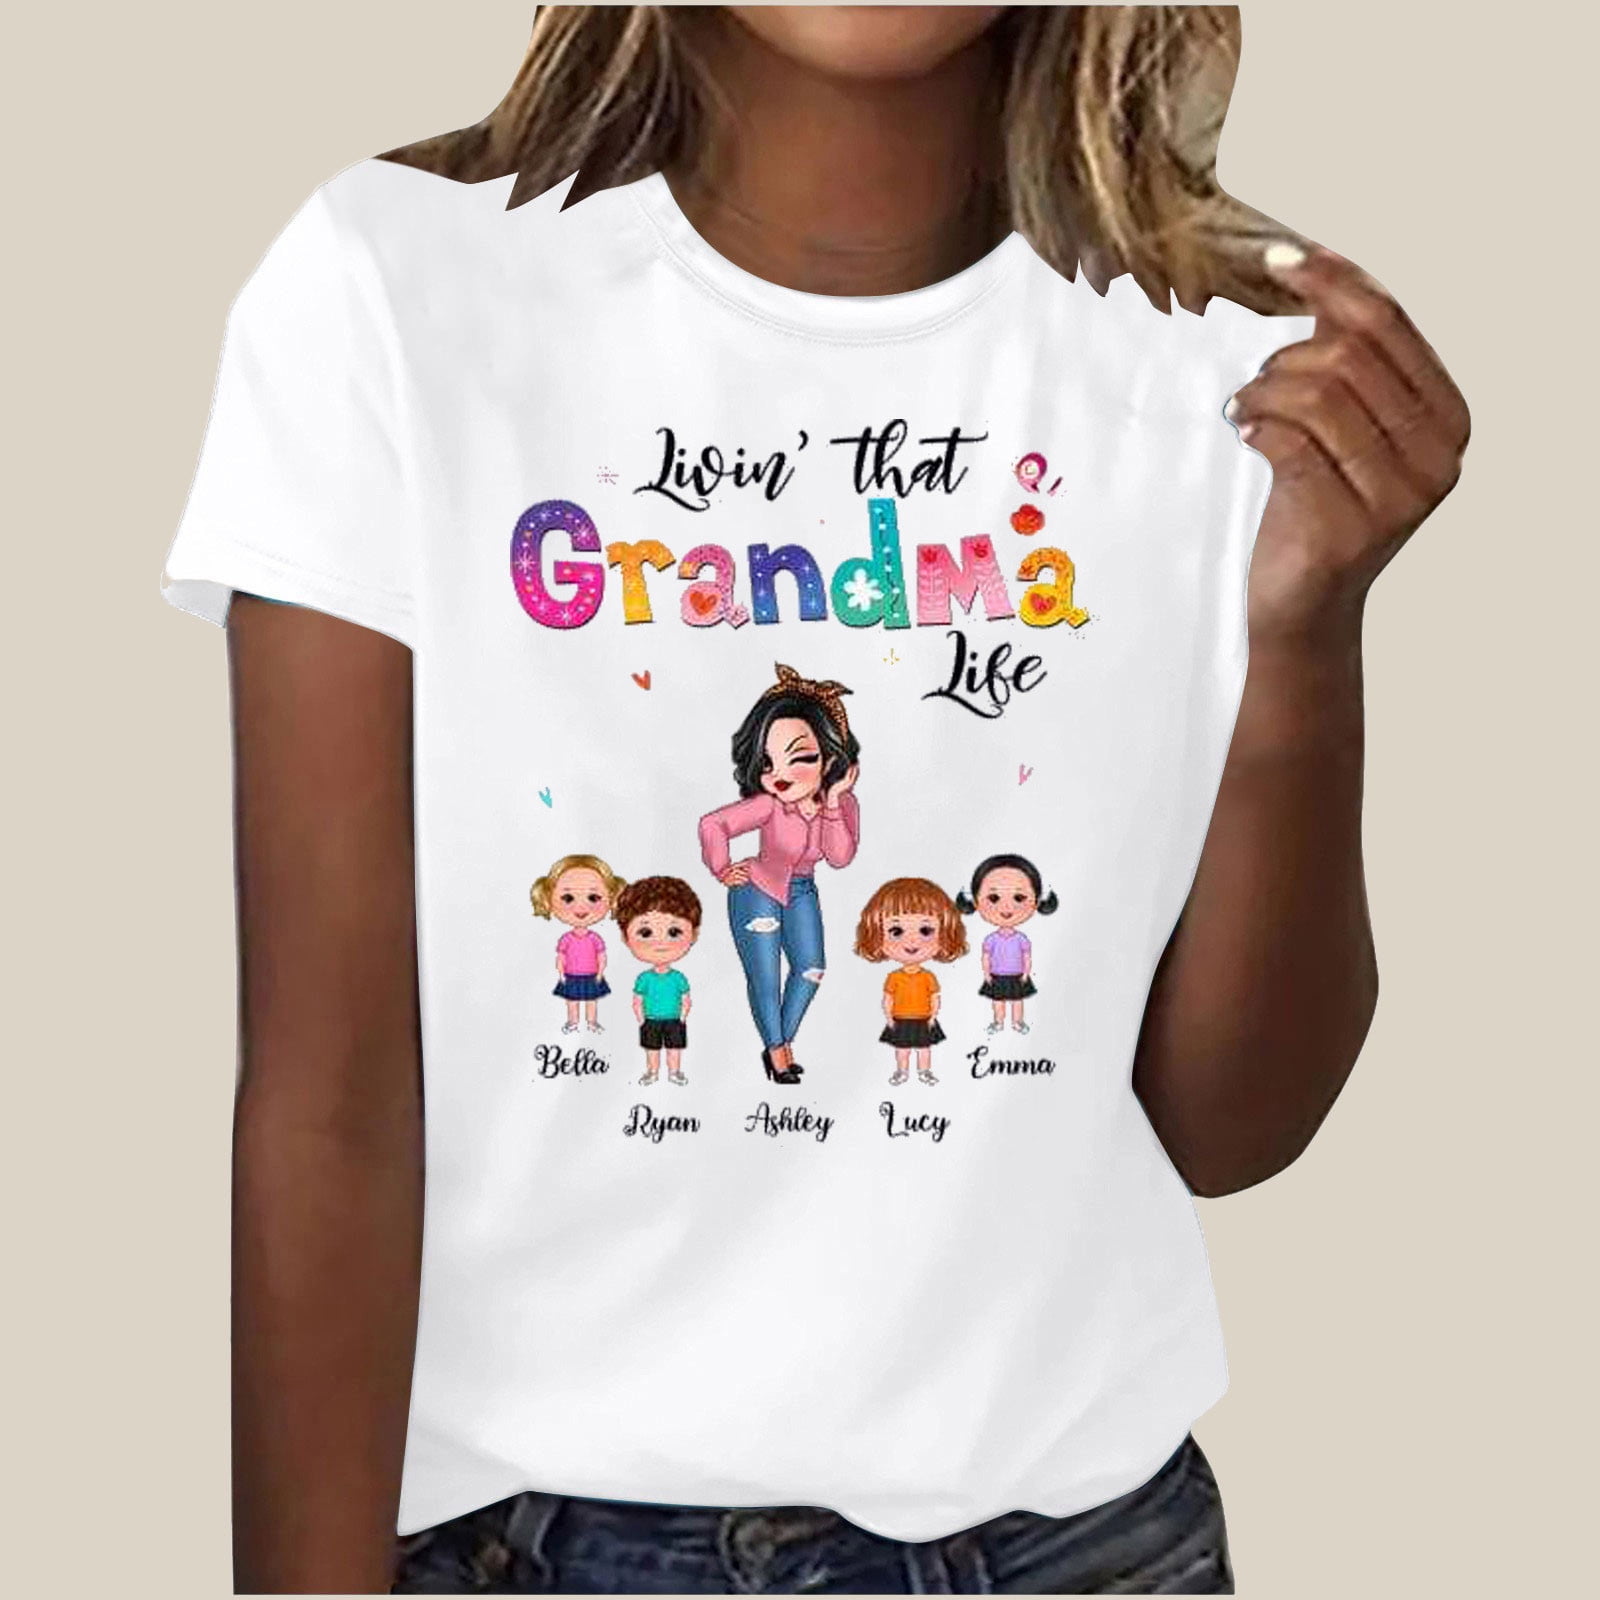 Thoughtful, Unique Gifts for Women: Menopausal Women Essential T-Shirt for  Sale by Grandmarr